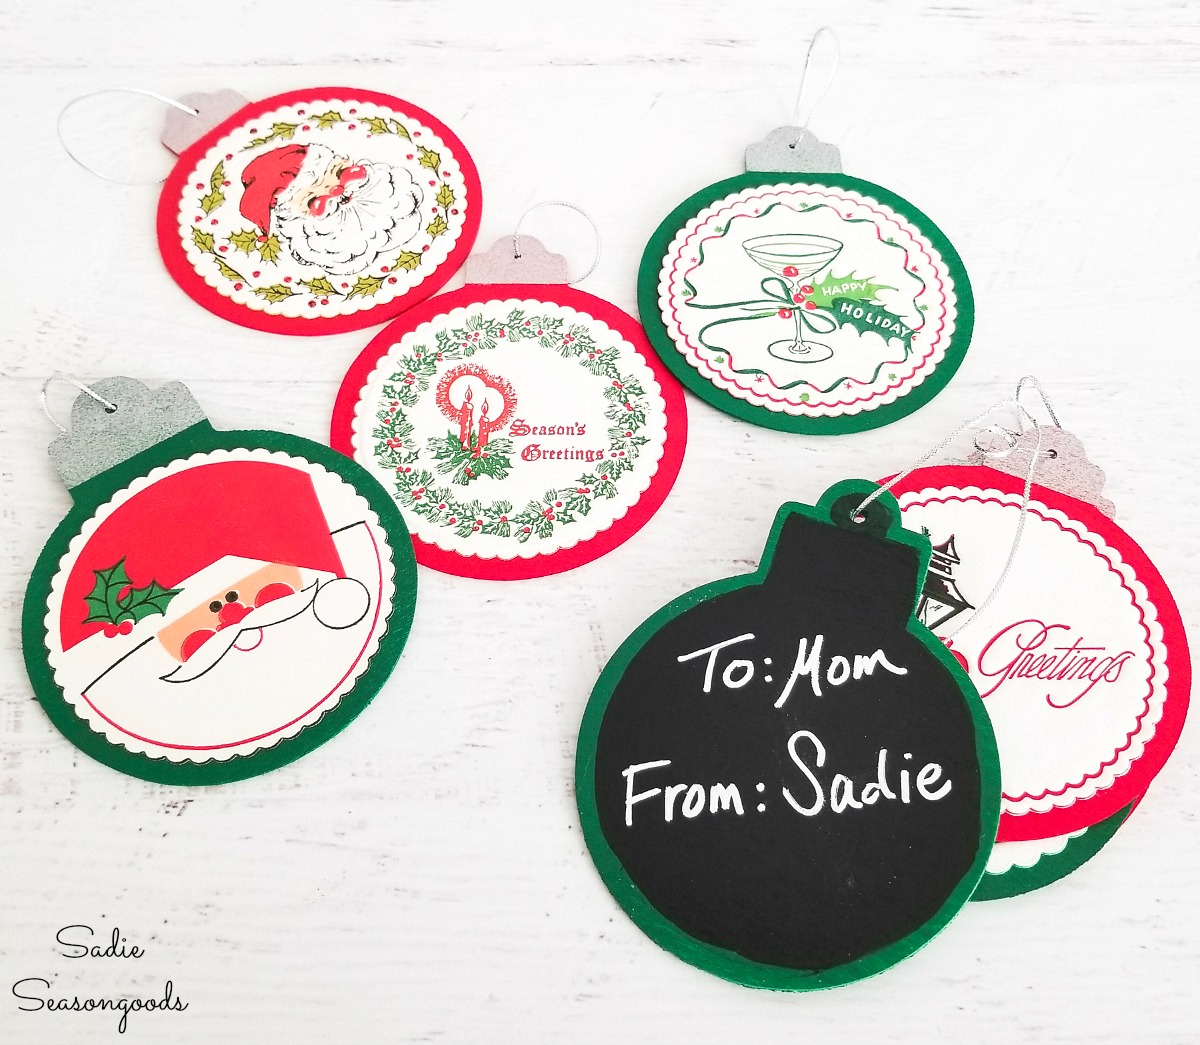 Wood ornaments as gift tags or chalkboard label or retro Christmas ornaments